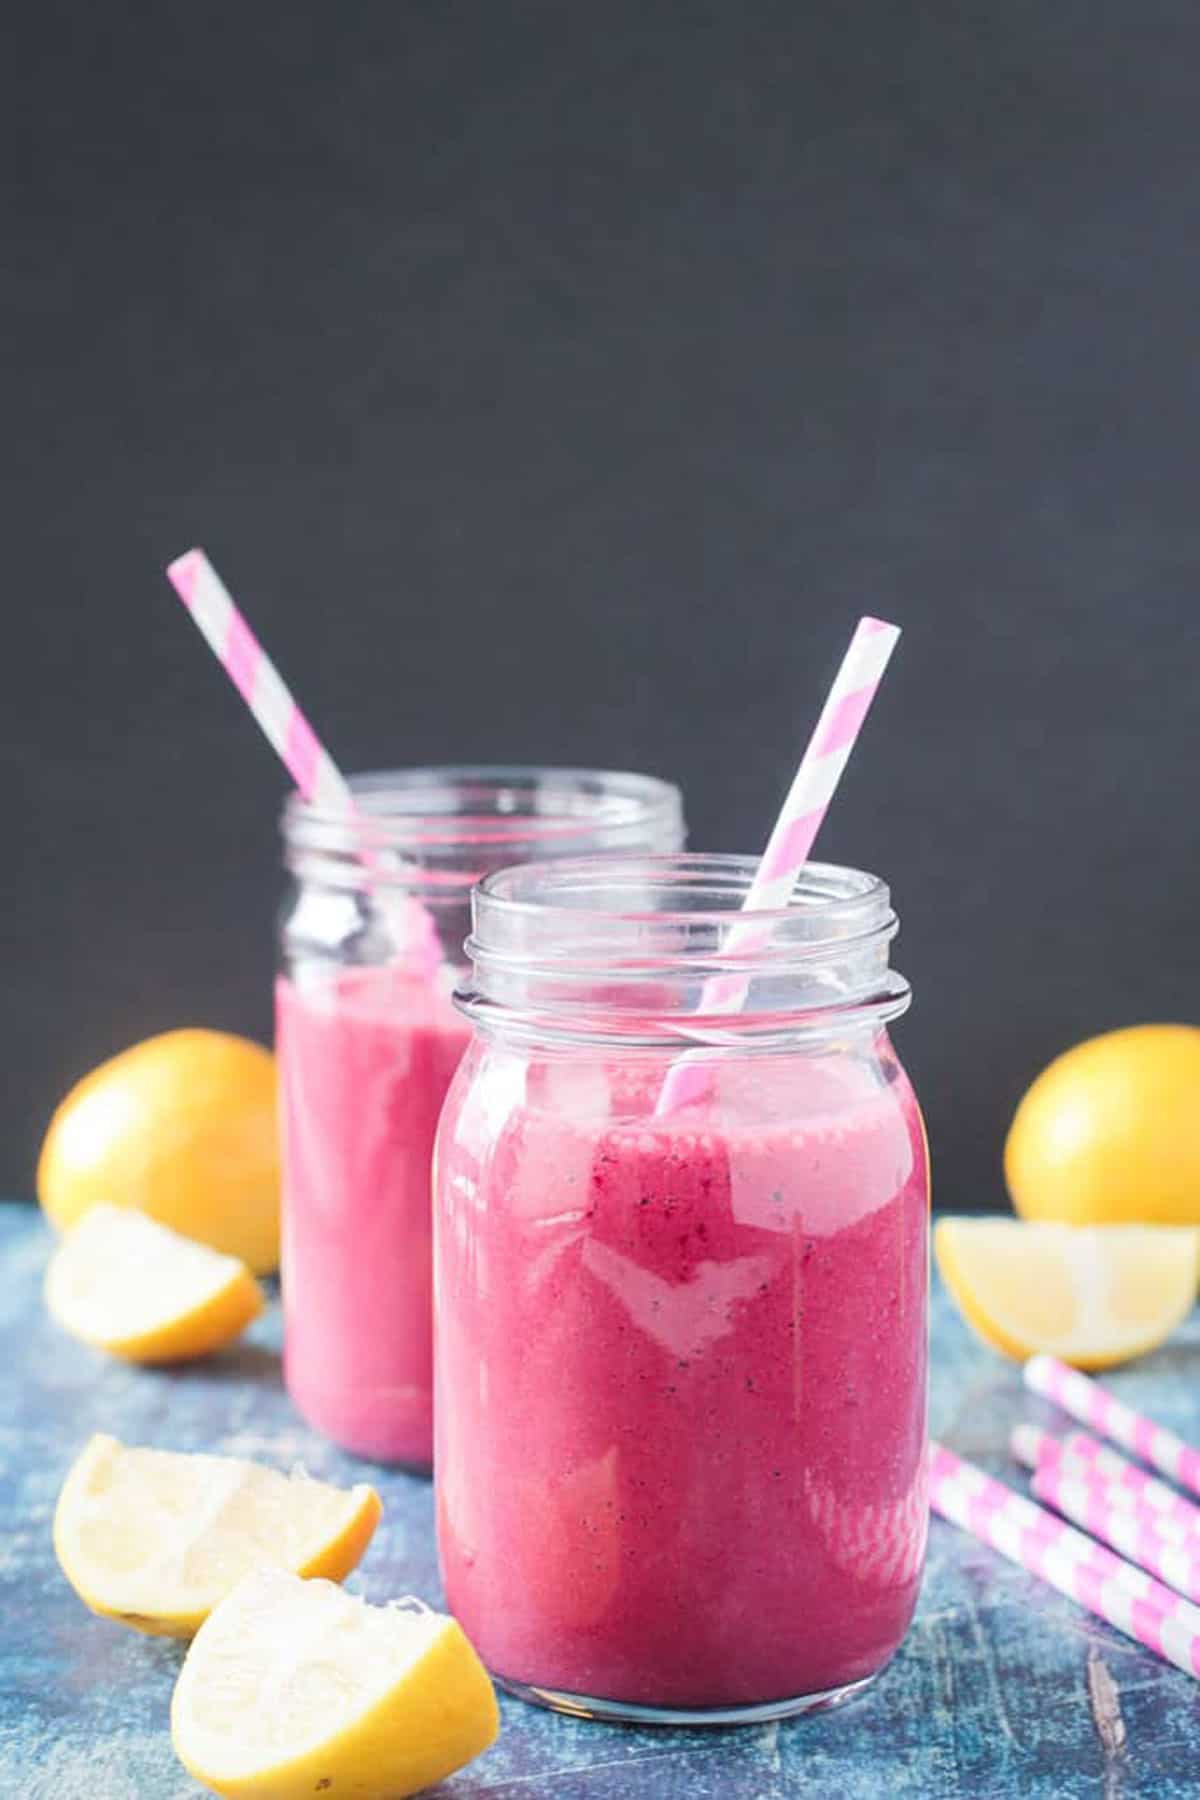 Two glass jars of hot pink smoothie with pale pink straws in each.